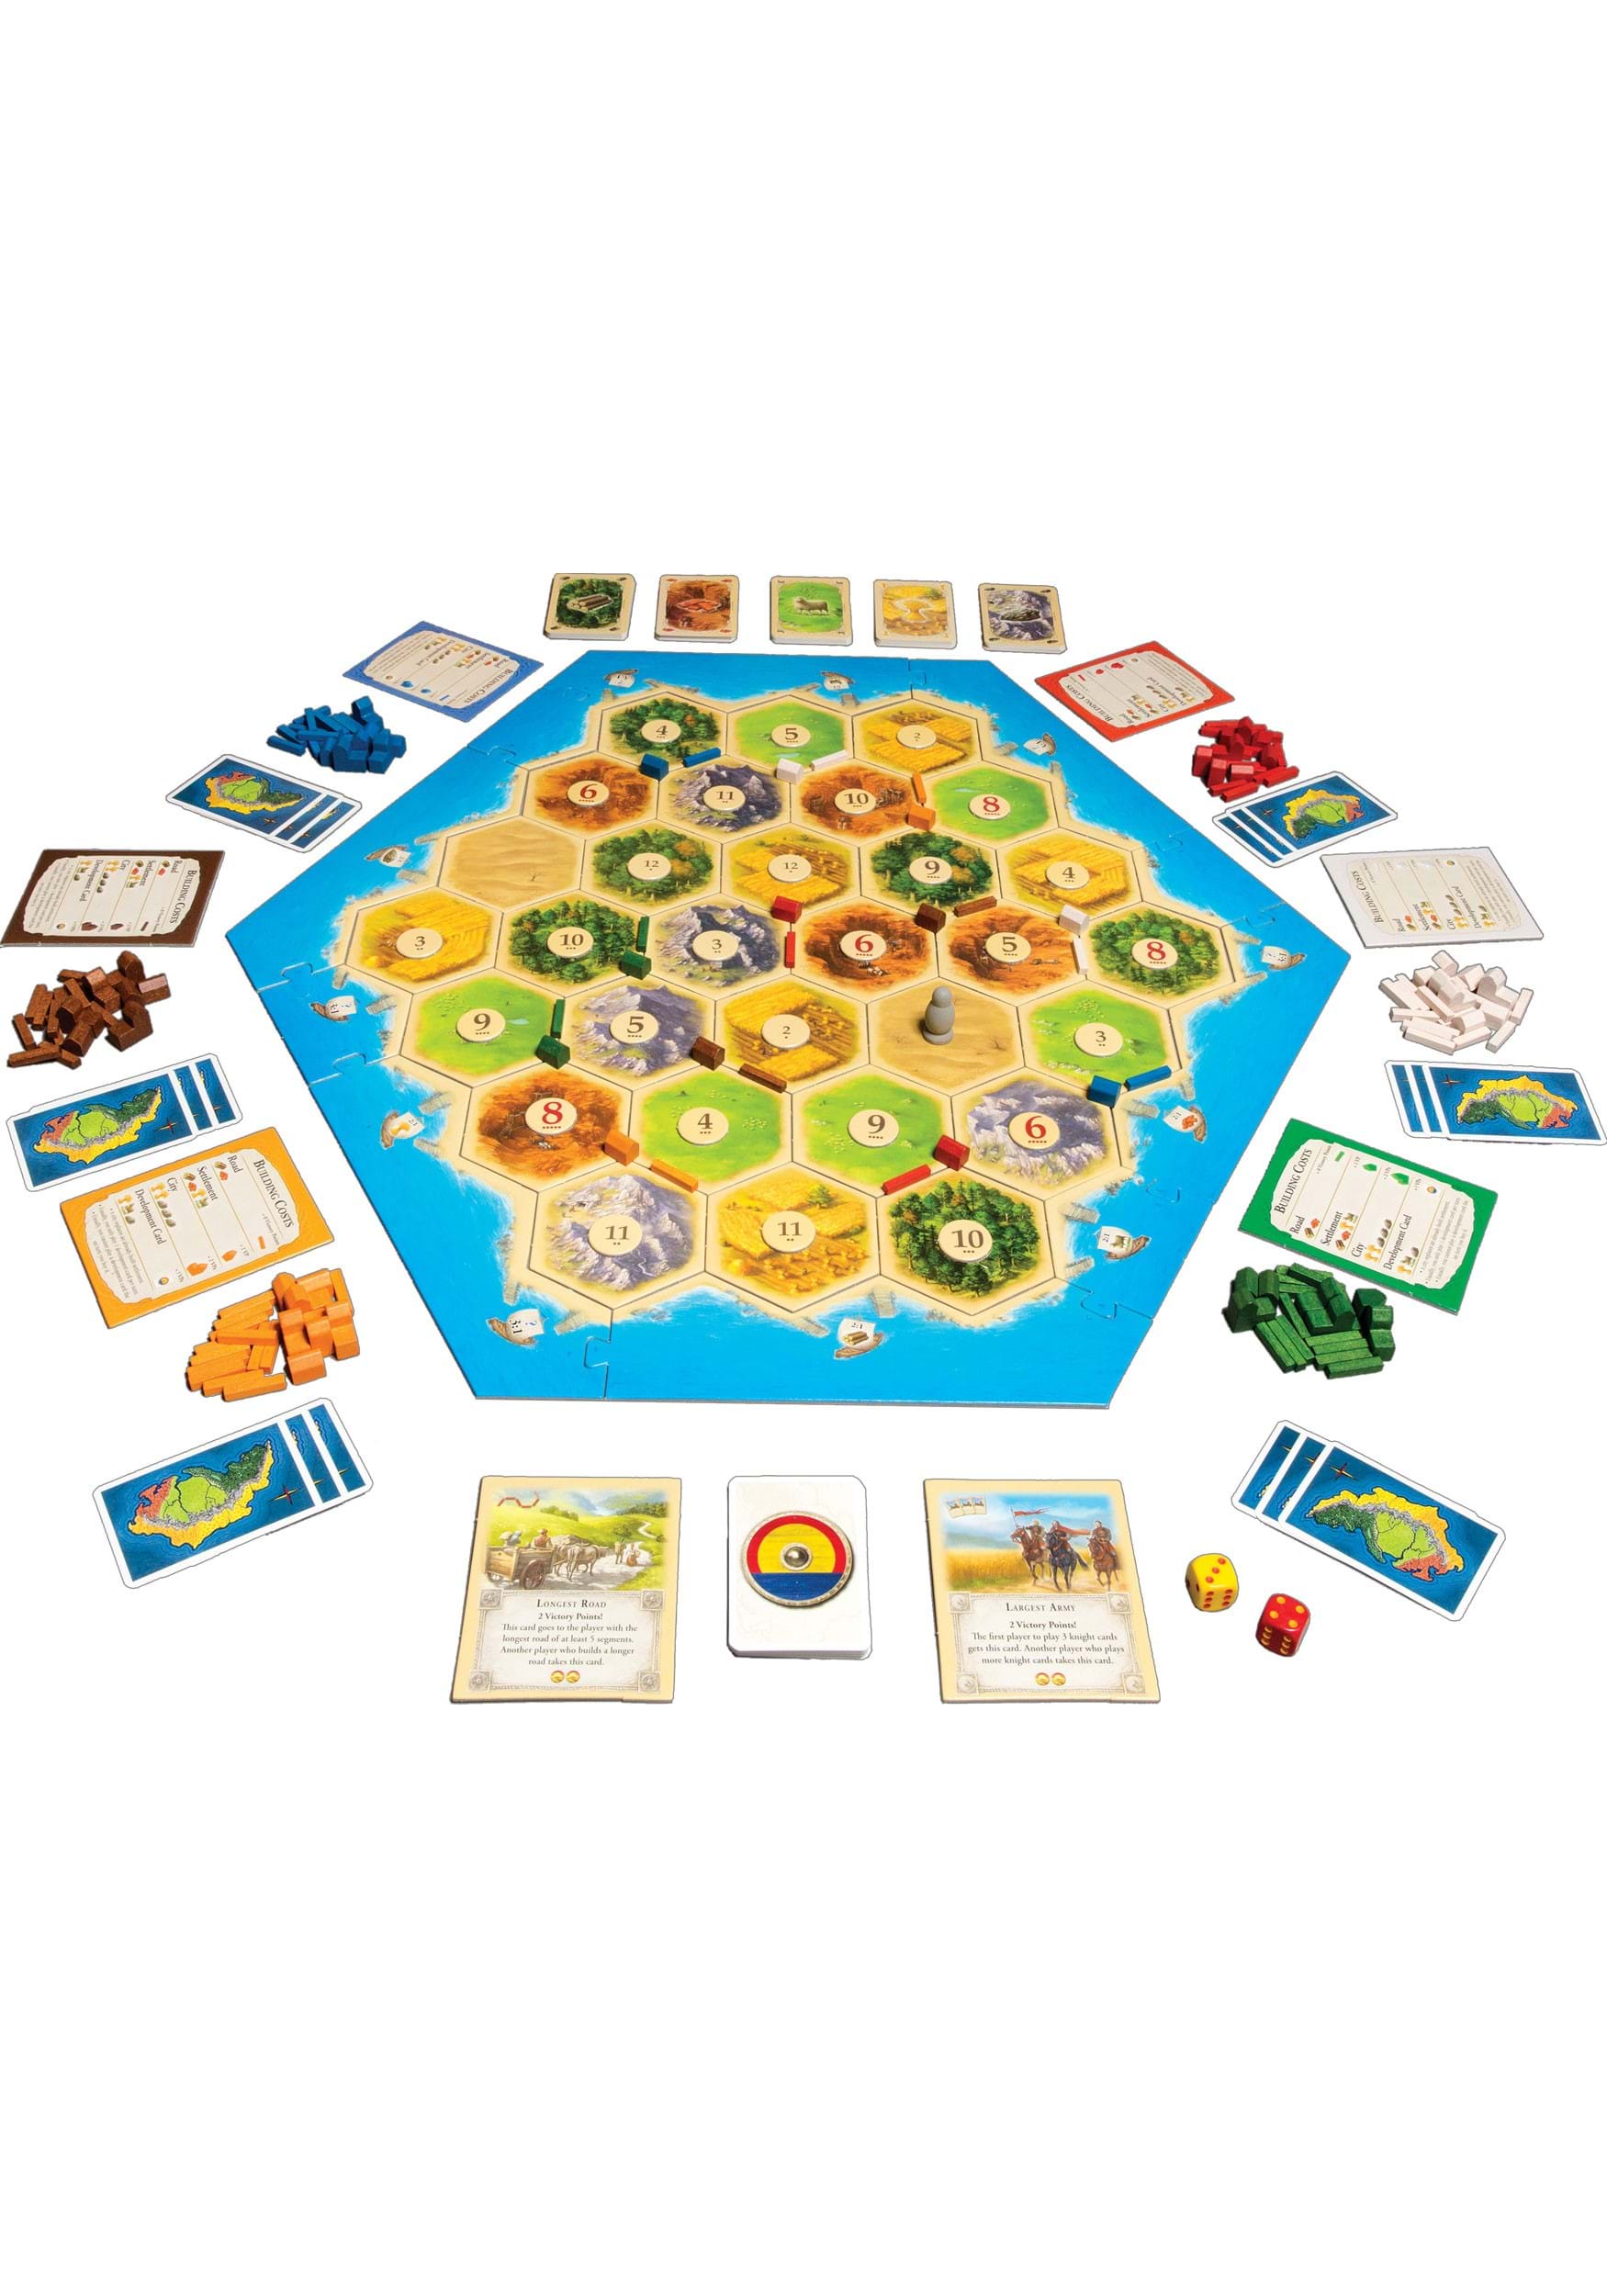 5 6 Player Catan Board Game Extension